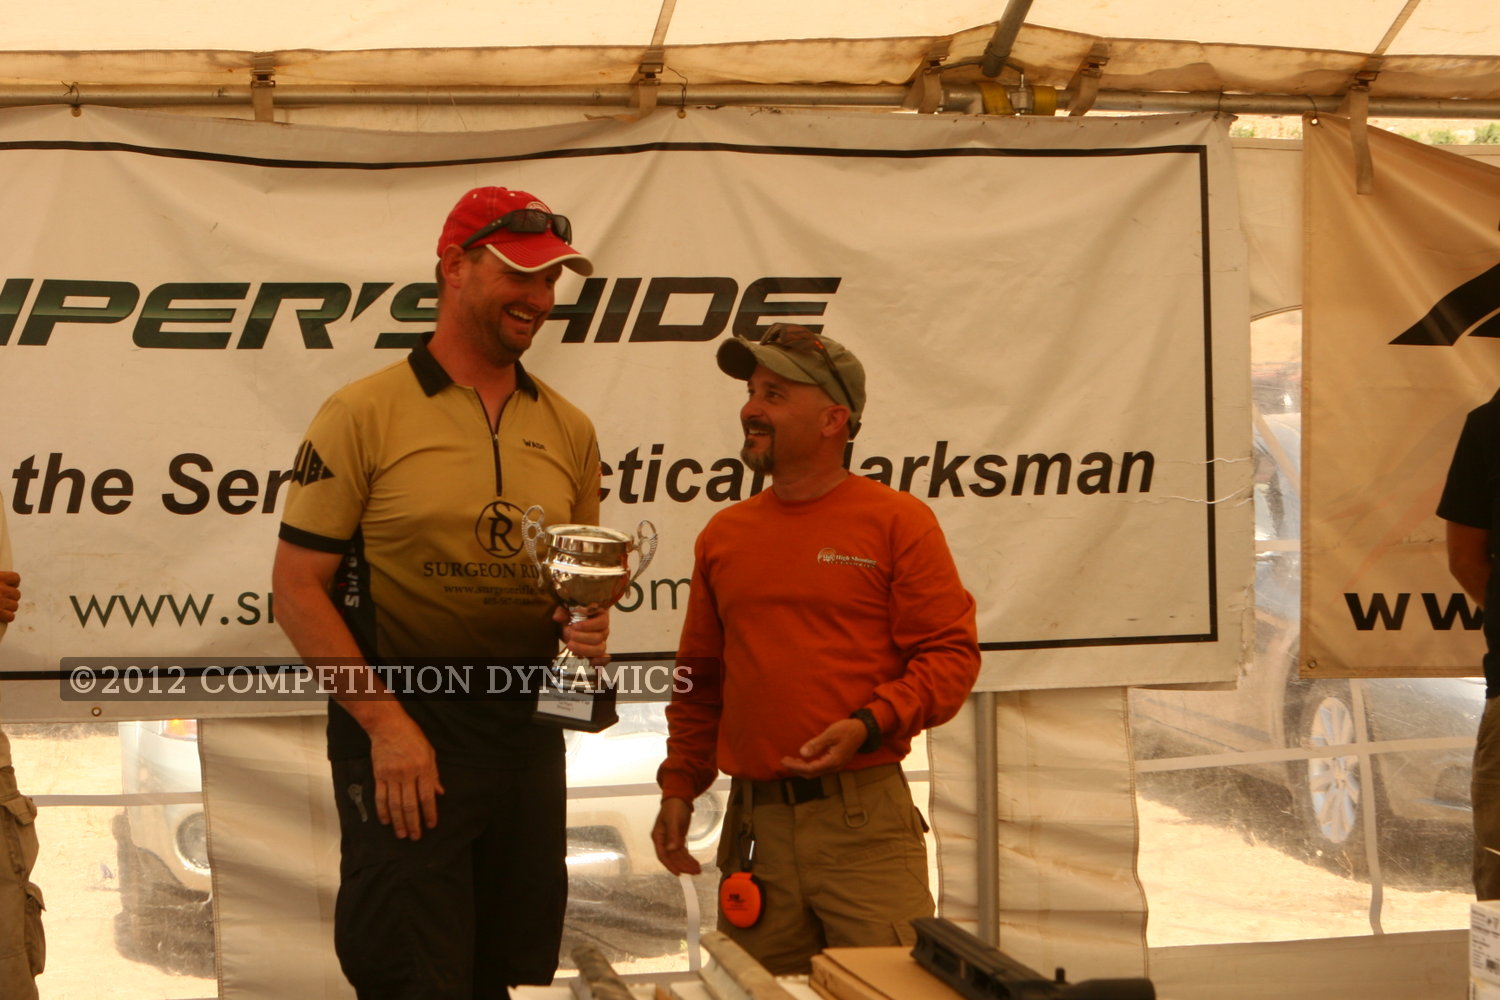 2012 Competition Dynamics SnipersHide Cup
, photo 